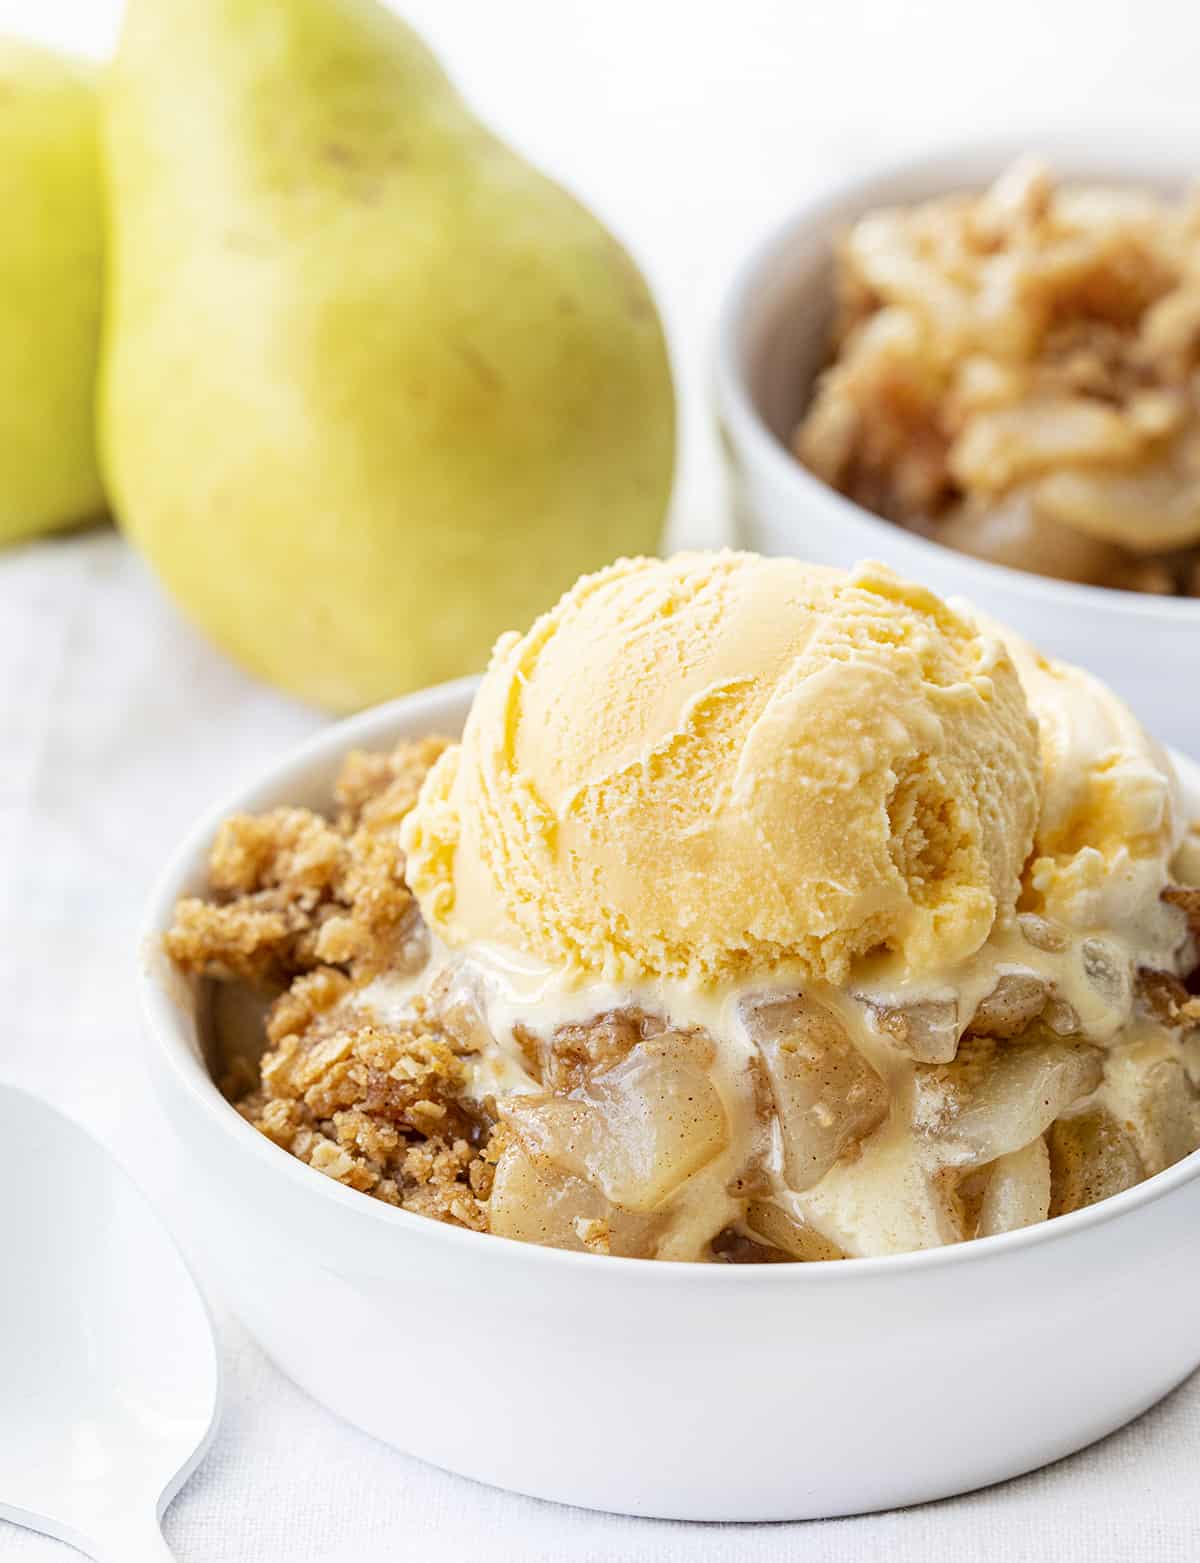 Bowl of Gingered Pear Crisp with Ice Cream and Pear in the Background. Dessert, Baking, Crisp, Best Crisp Recipes, Pear Crisp, Easy Pear Crisp, Holiday Desserts, Holiday Recipes, Old Fashioned Recipes, Historic Recipes, Grandma's Recipes, i am baker, iambaker